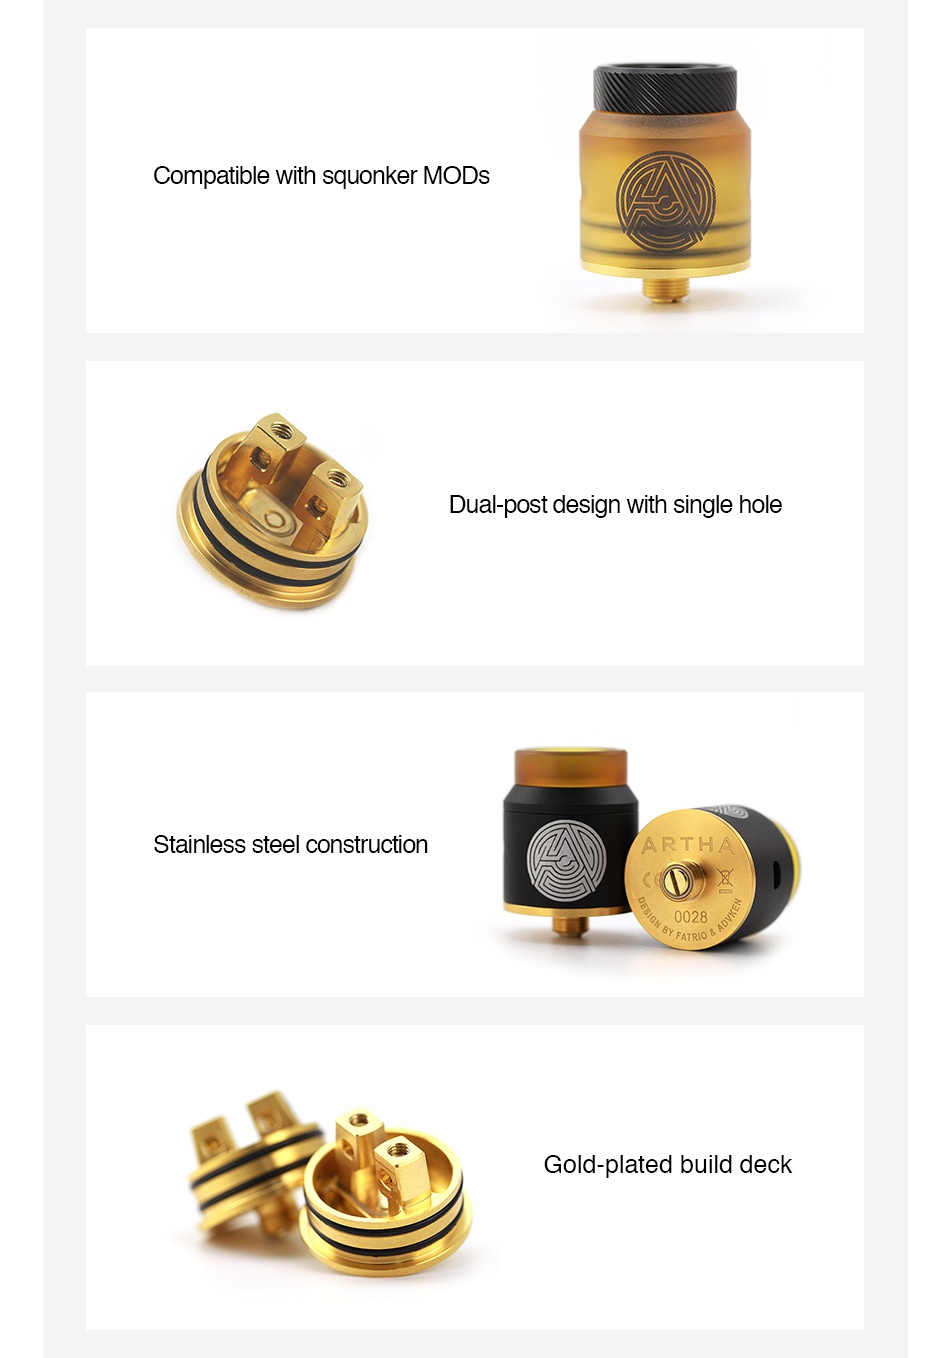 Advken Artha RDA Compatible with squonker MOds Dual post design with single hole Stainless steel construction ARTH  x 0028 Gold plated build deck